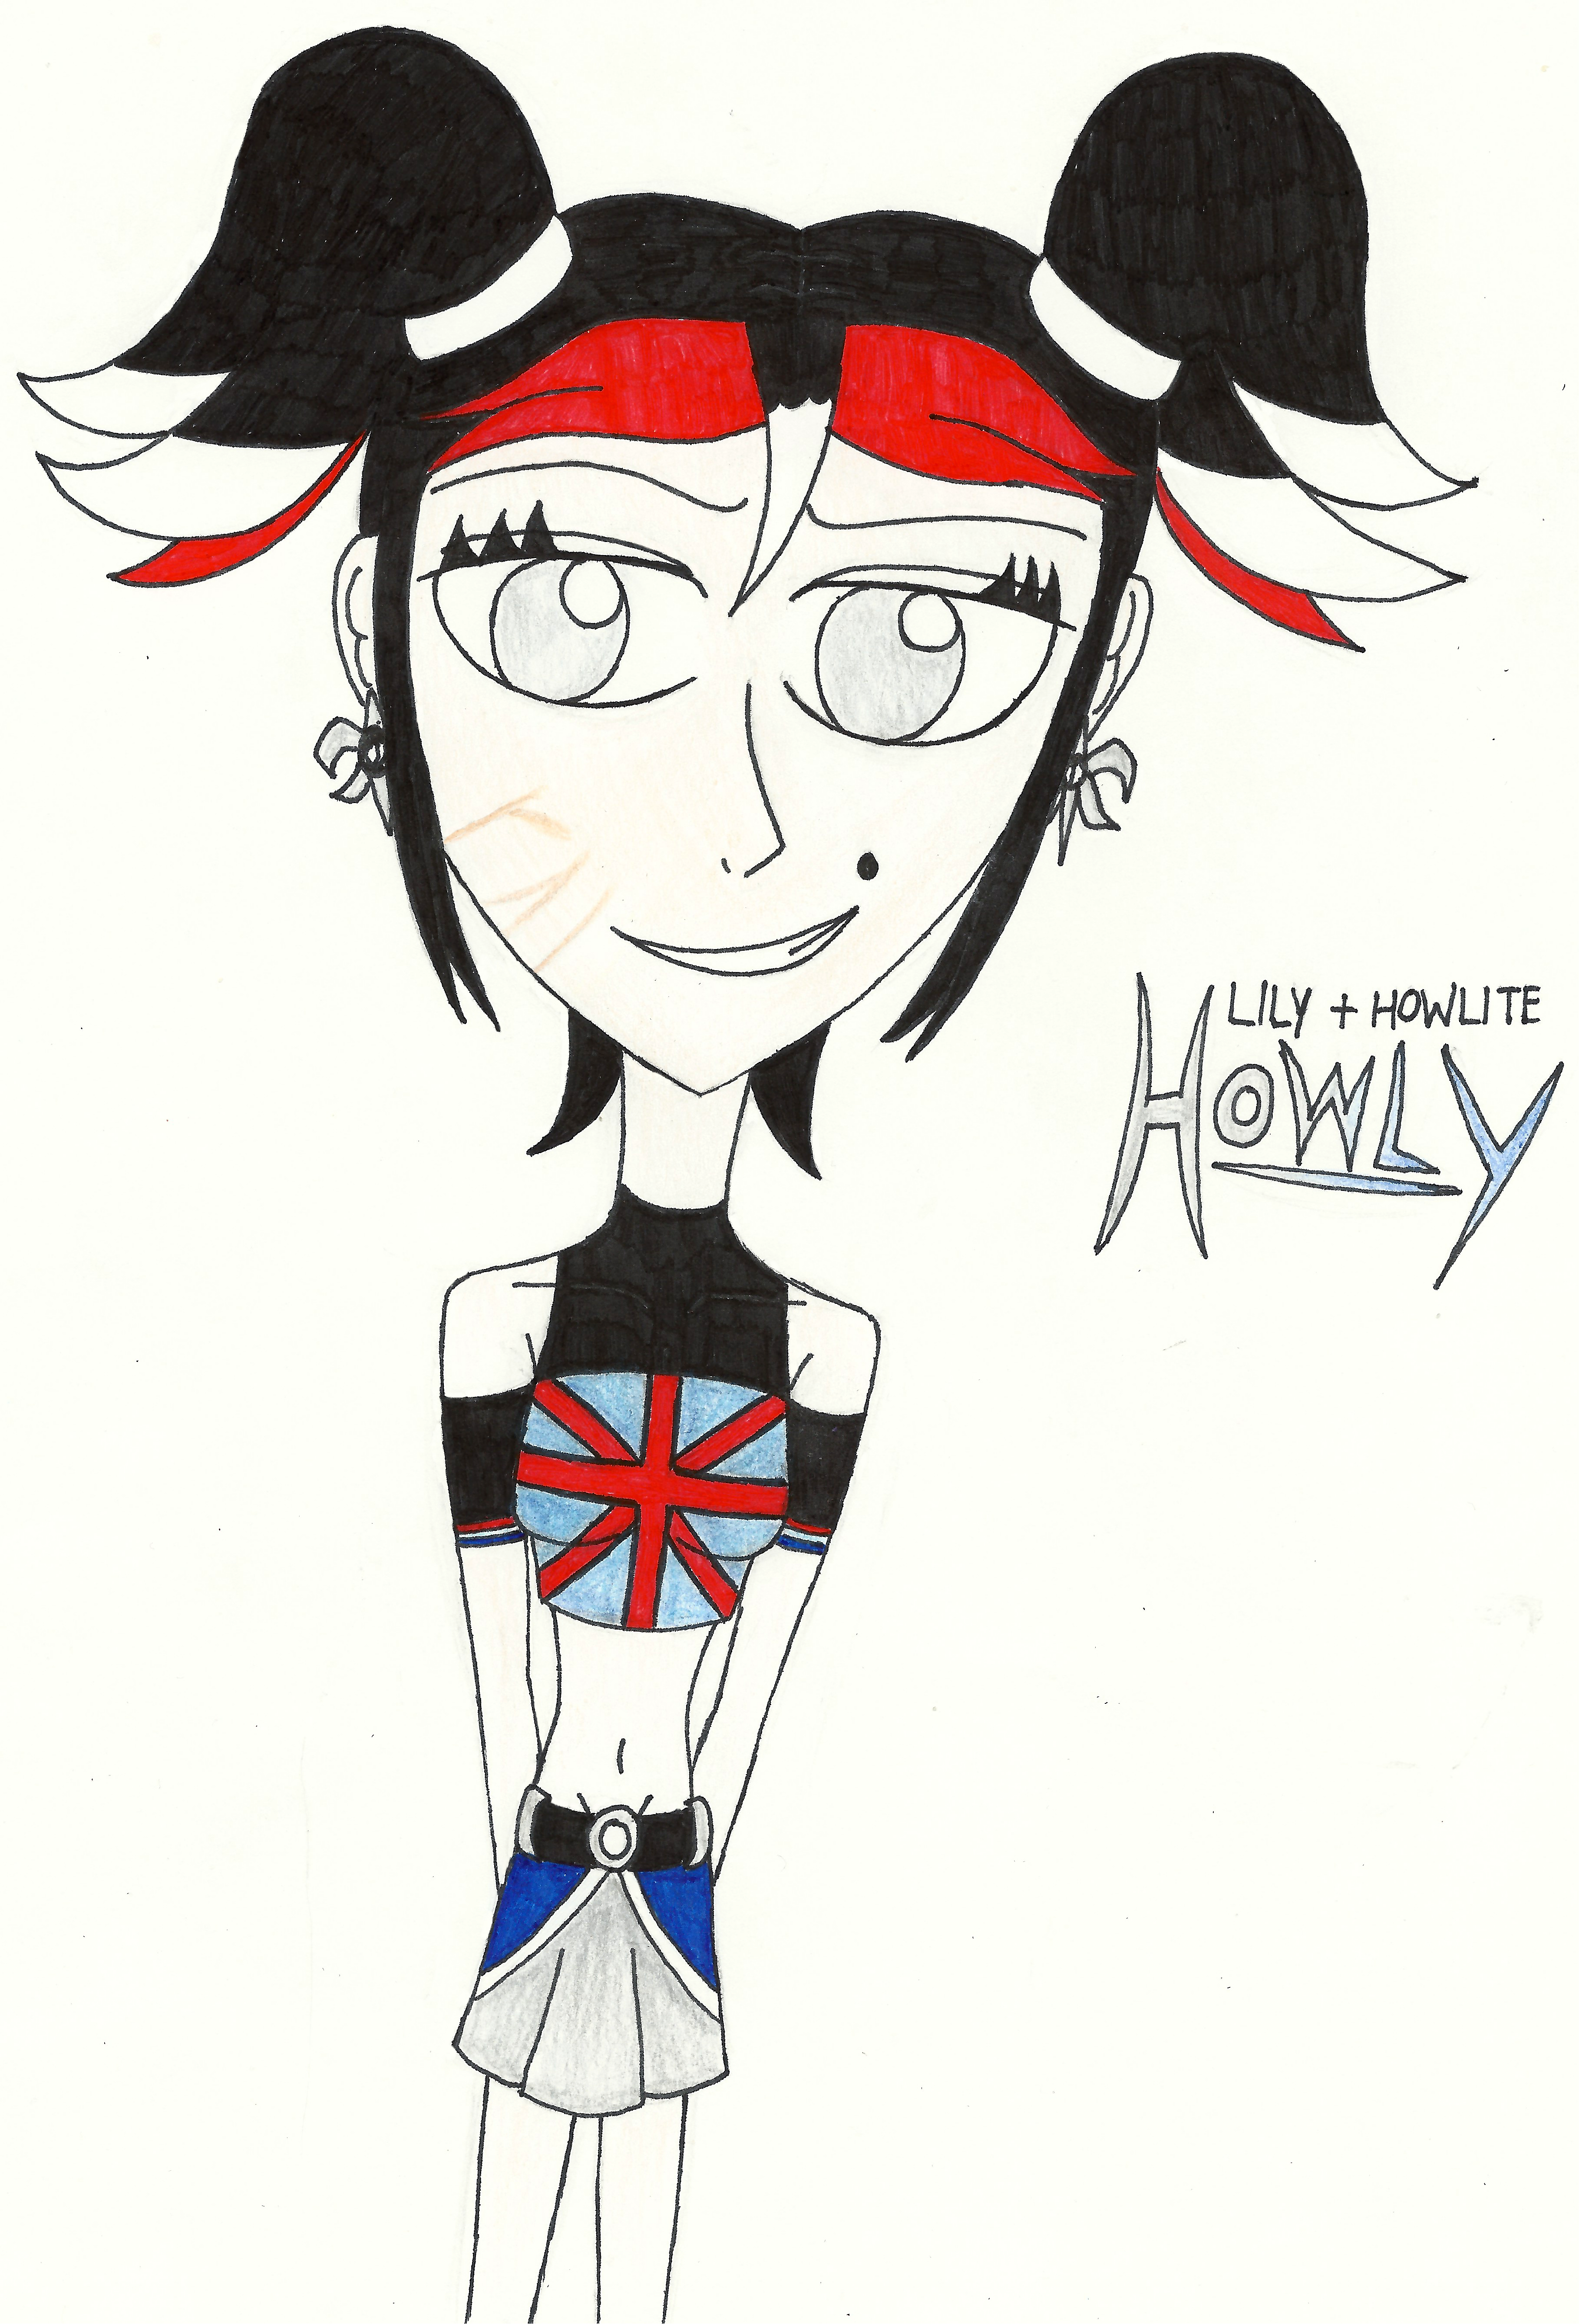 Hexafusion #1: Howly